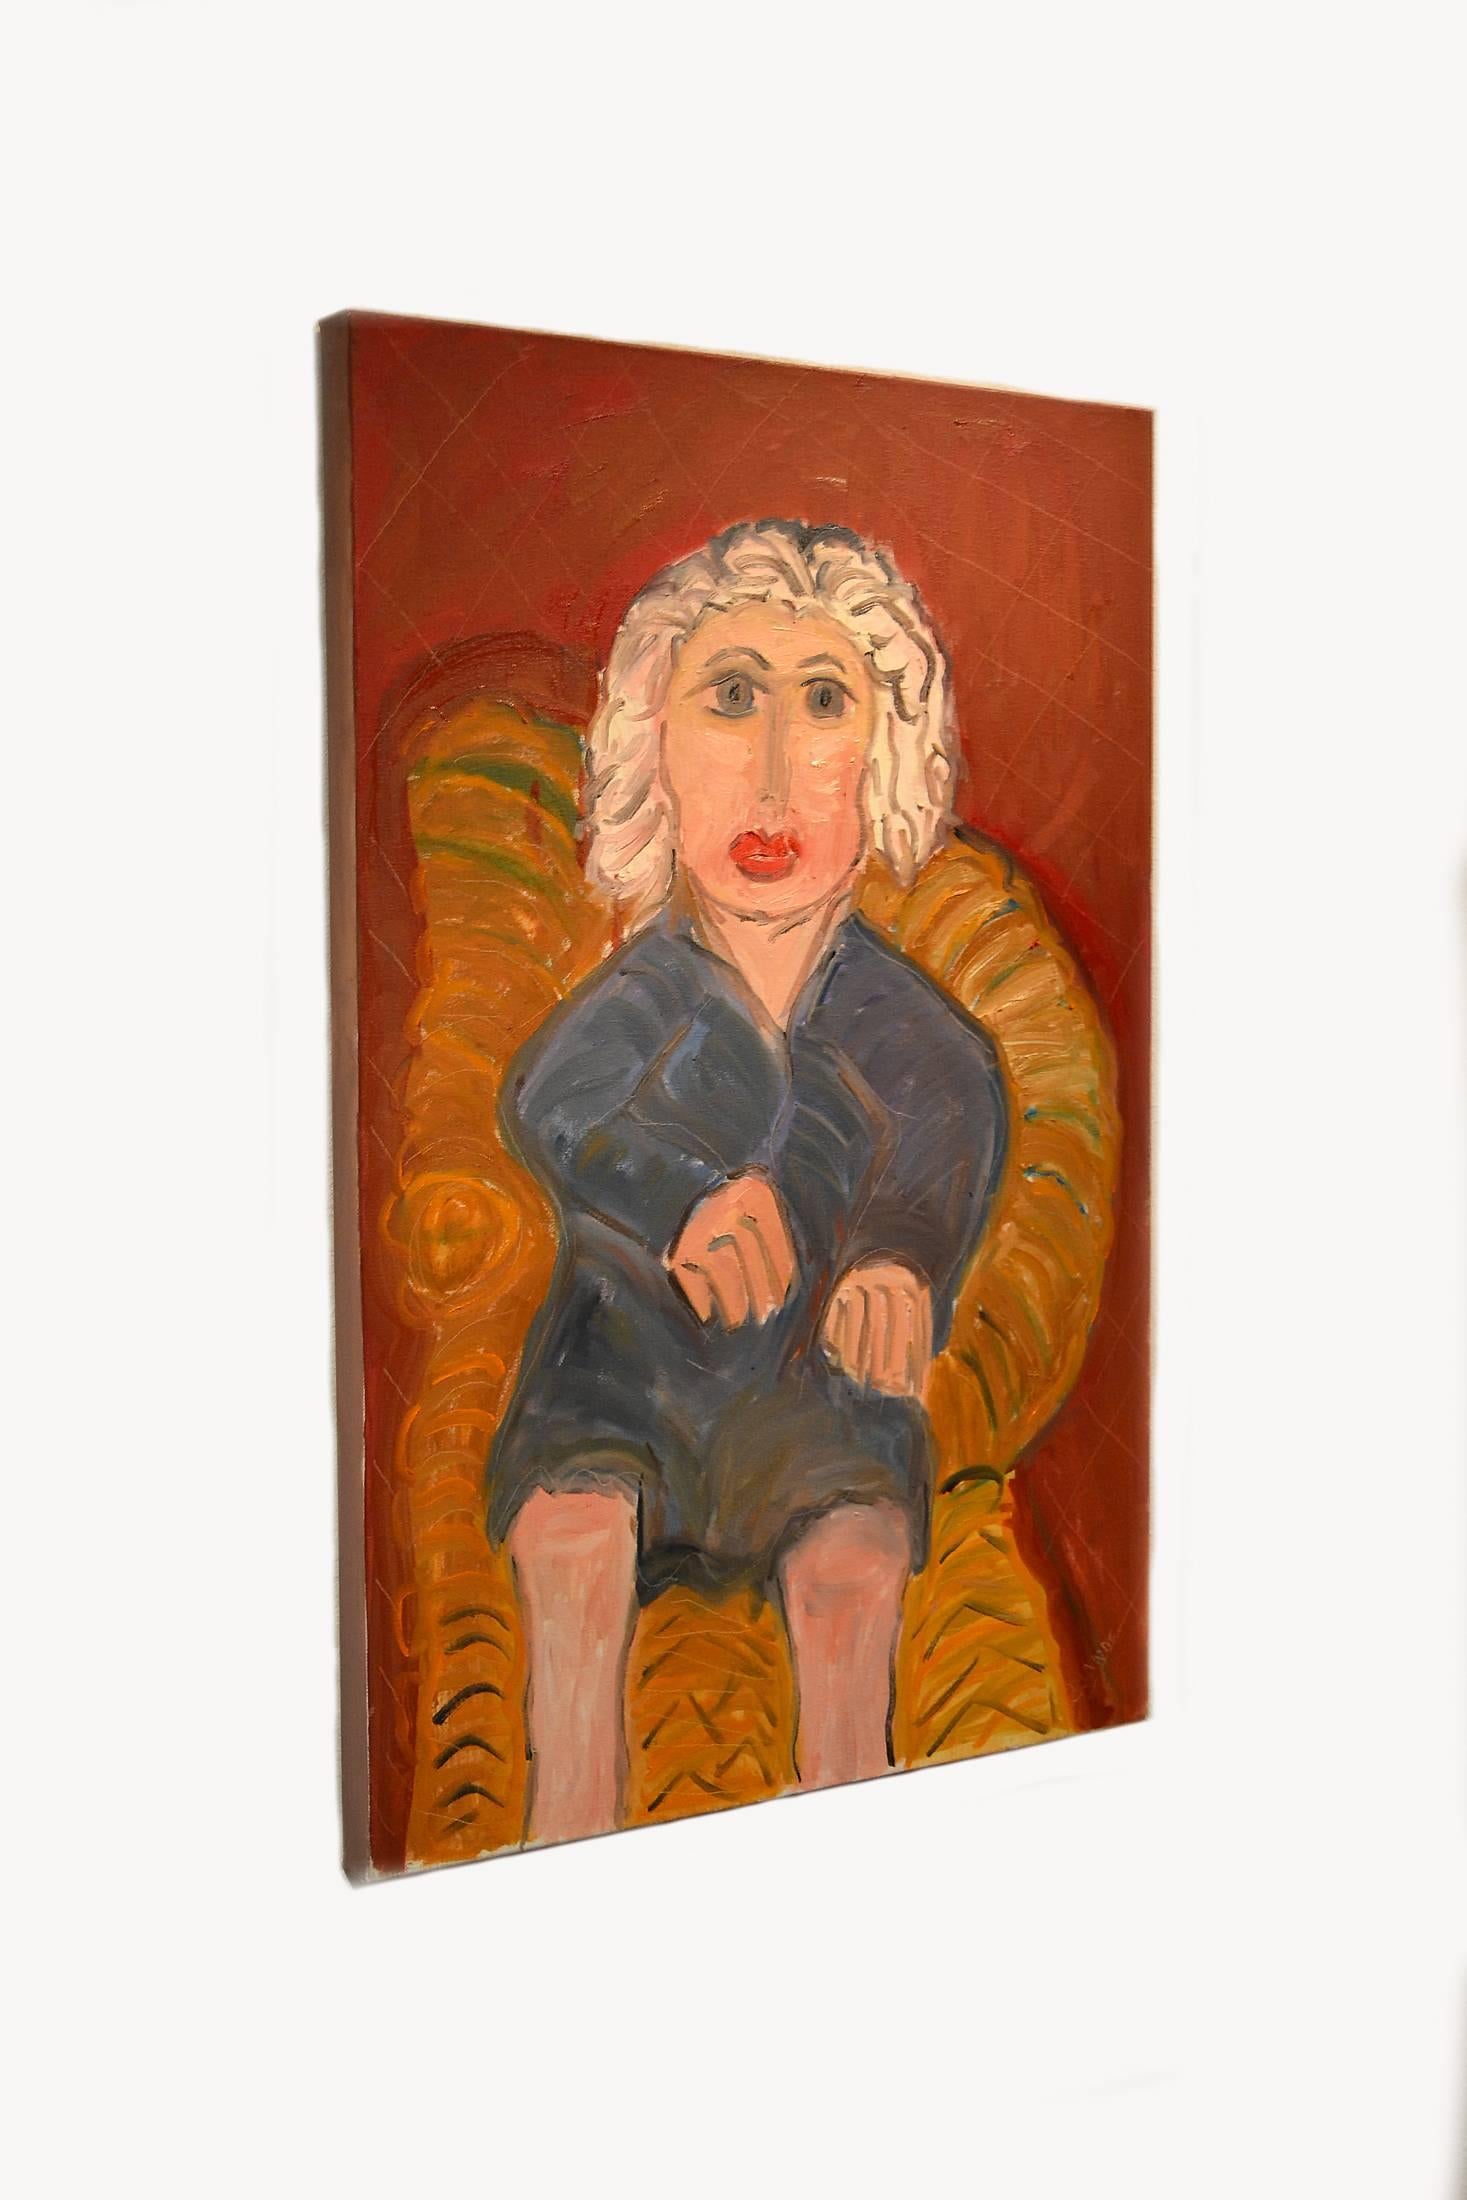 This exceptional painting titled portrait of white haired lady on wicker is by highly listed and respected self-taught artist JoAnne Fleming (b. 1930). The artist's characteristic style exudes a Primitive quality to each and every work of art she